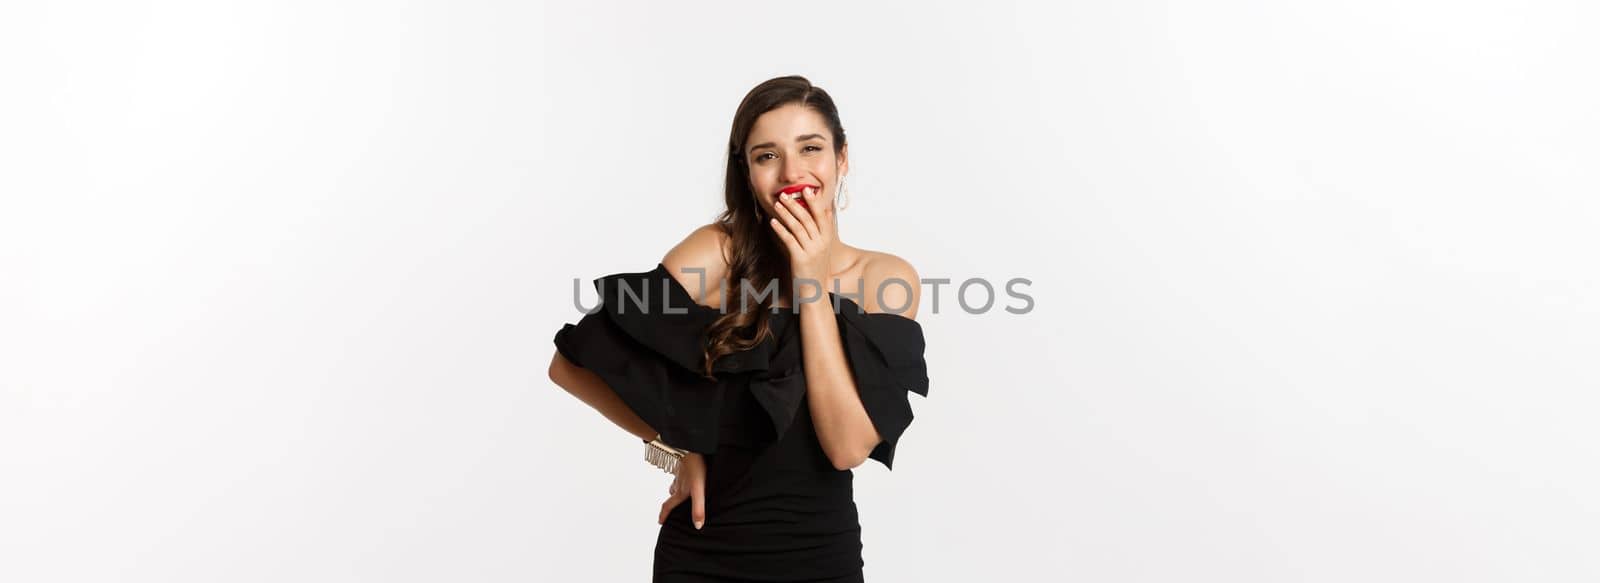 Fashion and beauty. Coquettish young woman in black dress, laughing and covering mouth with hand, posing flirty over white background.